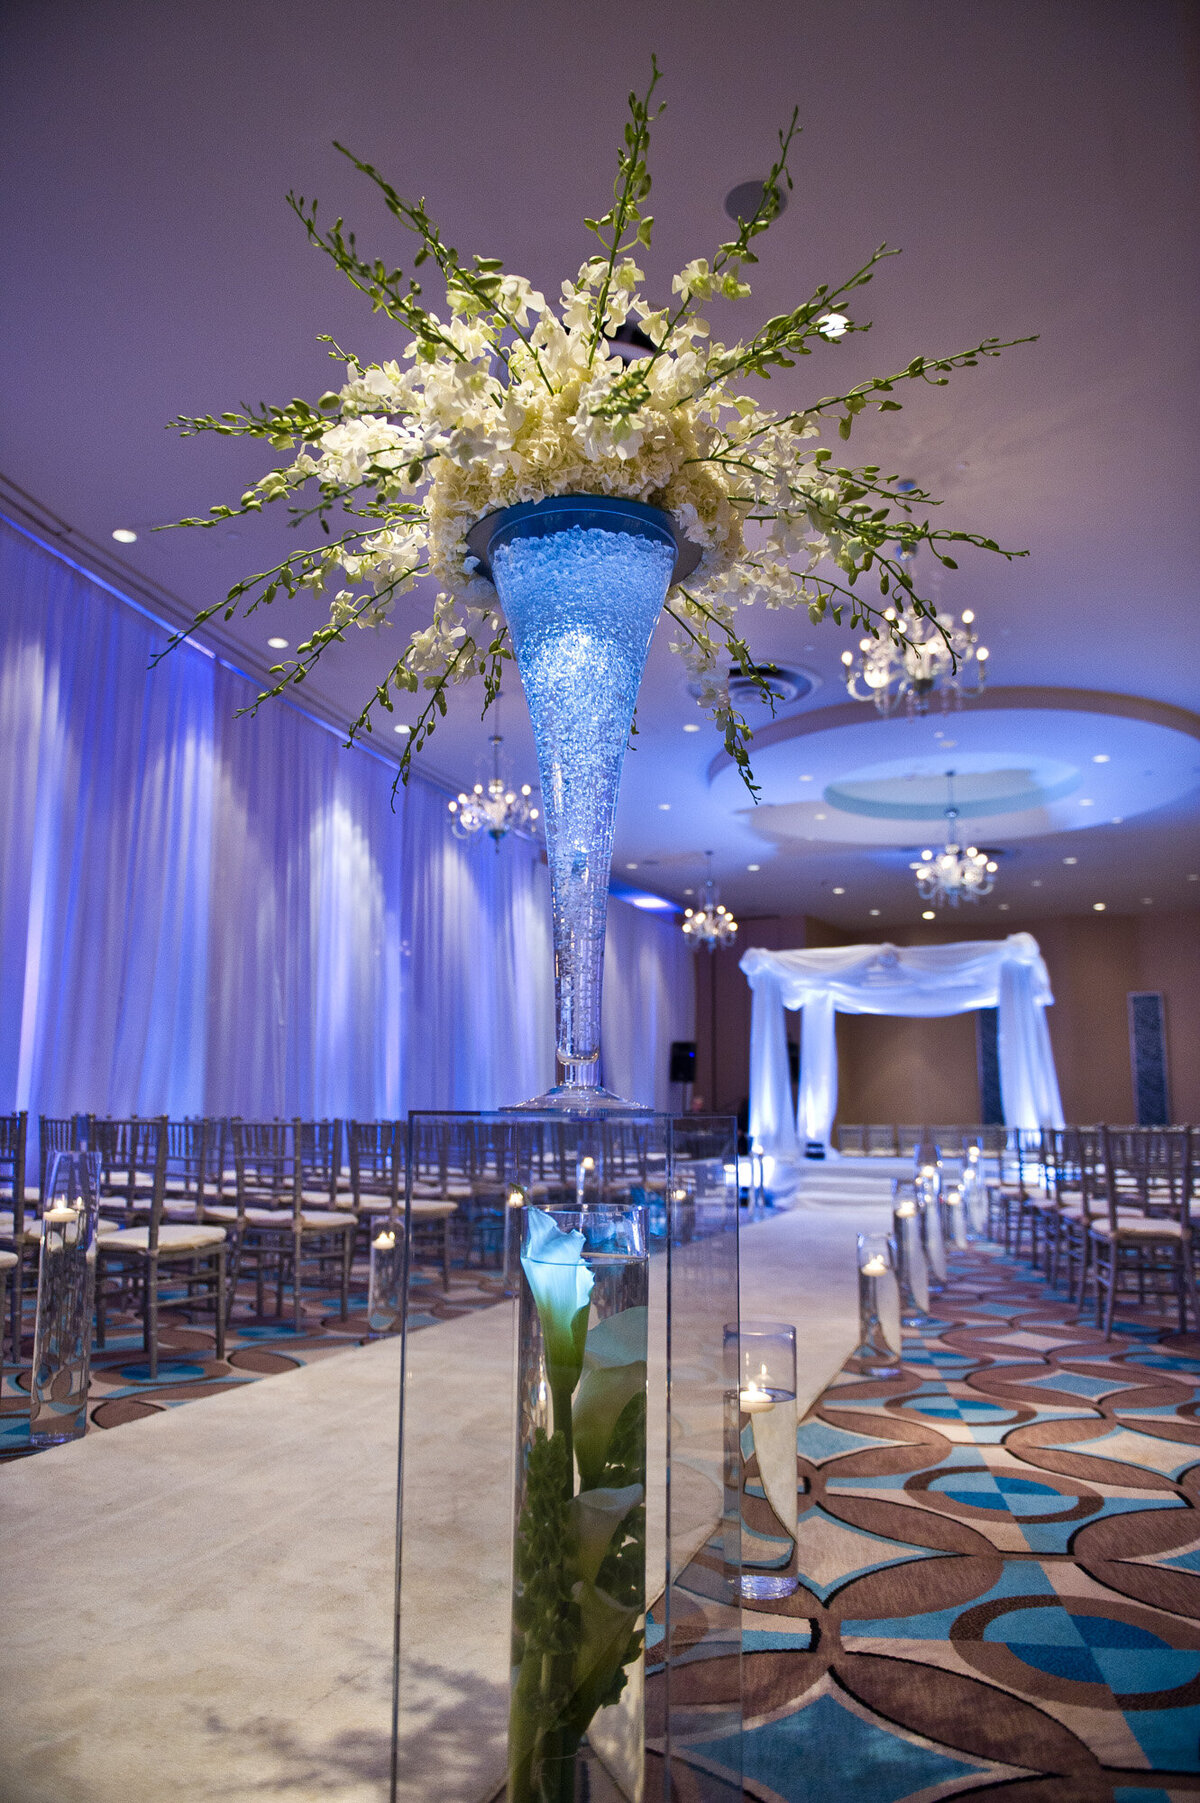 Indoor wedding ceremony site with white draping and florals